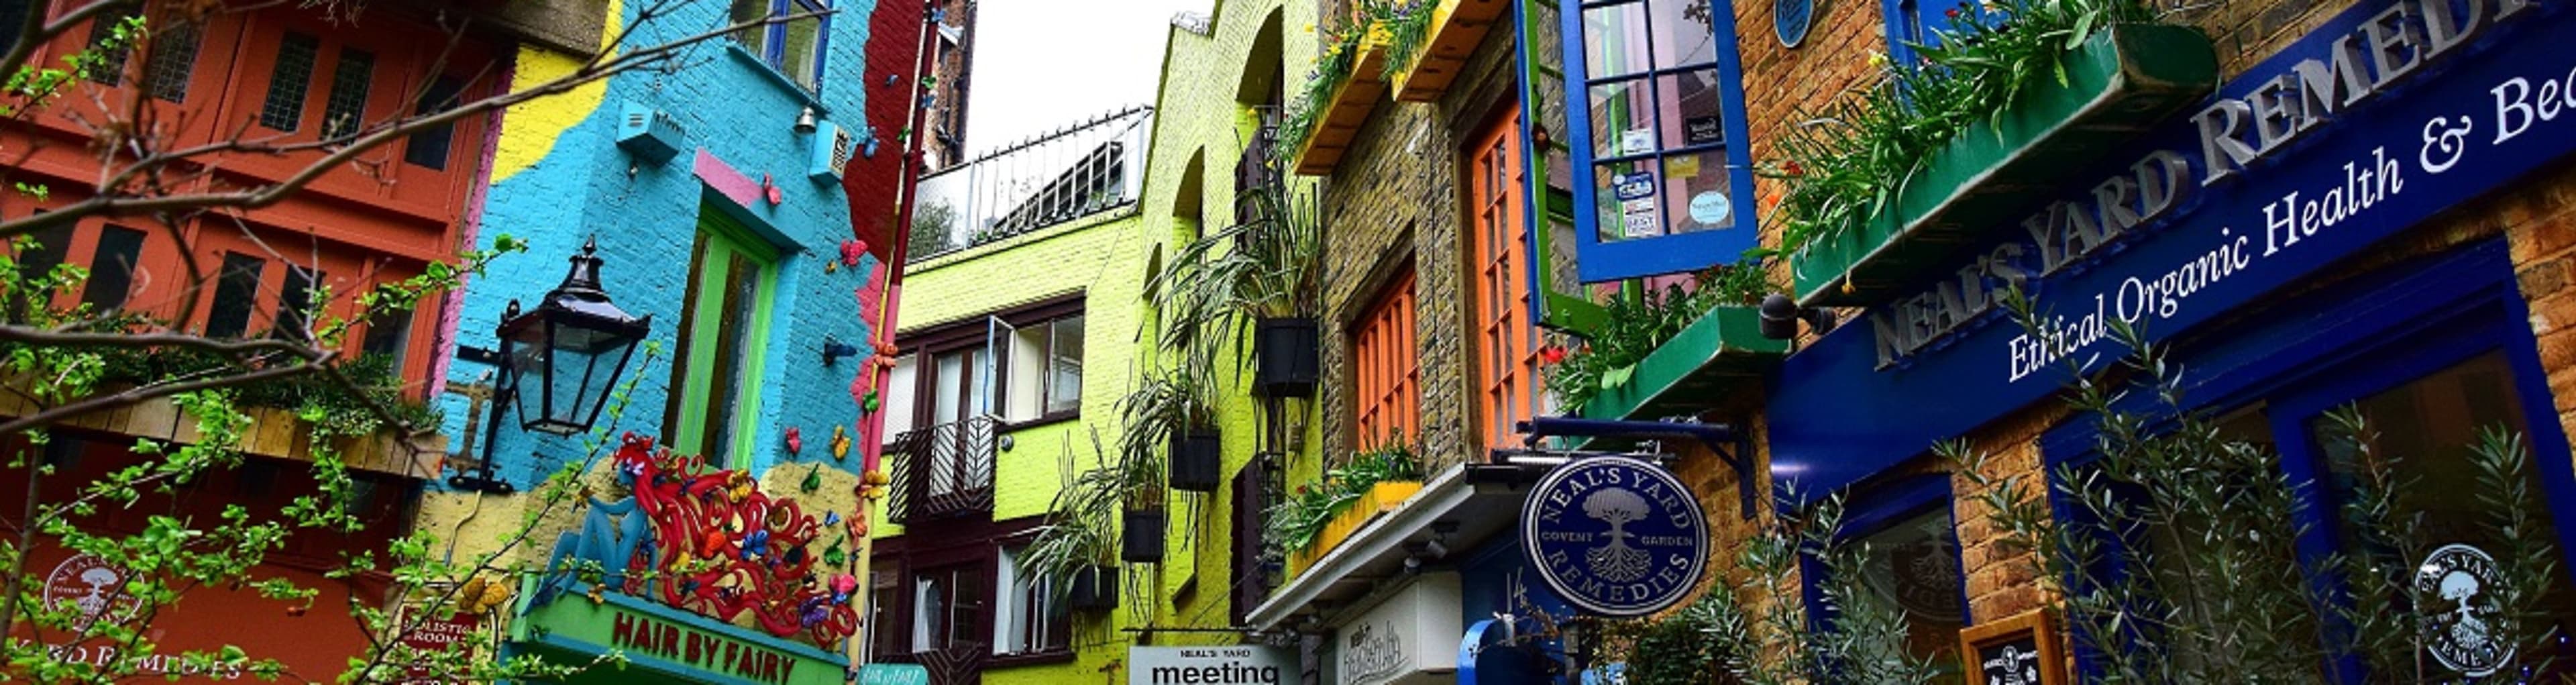 Colorful shopfronts of Neal's Yard Covent Garden